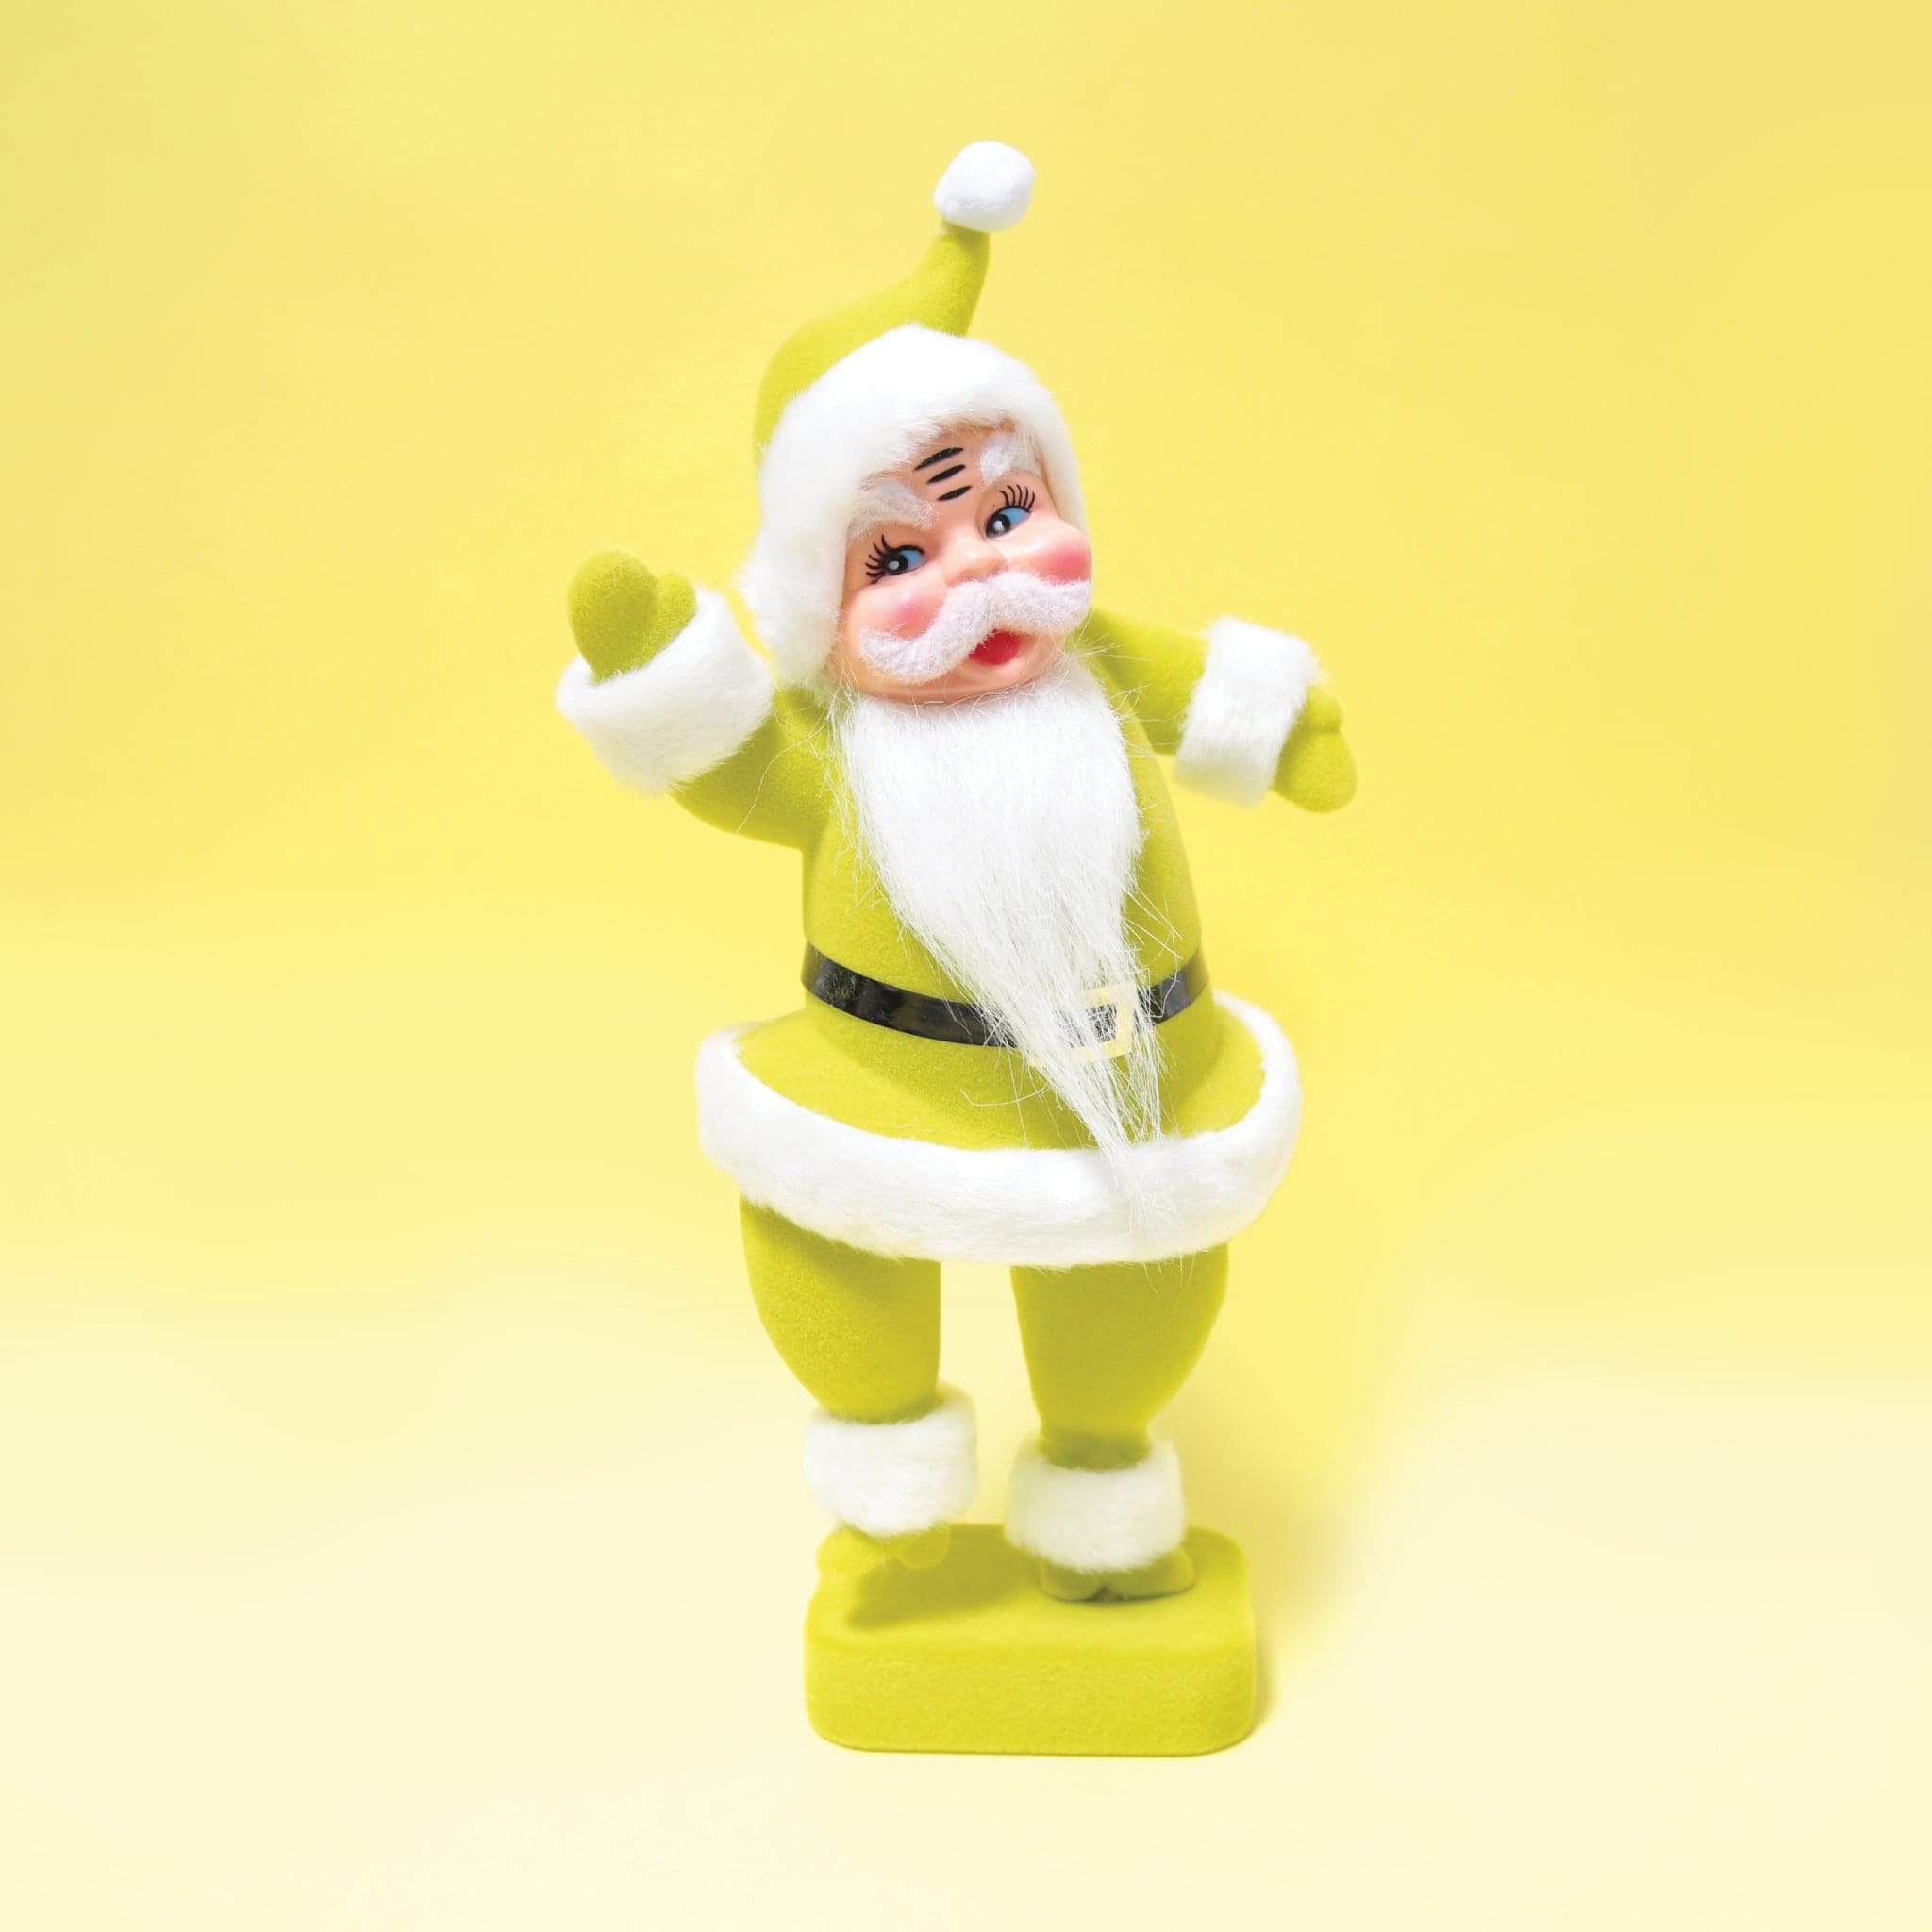 A plastic santa figurine with a chartreuse suit on with furry detailing the cuffs, jacket and hat.